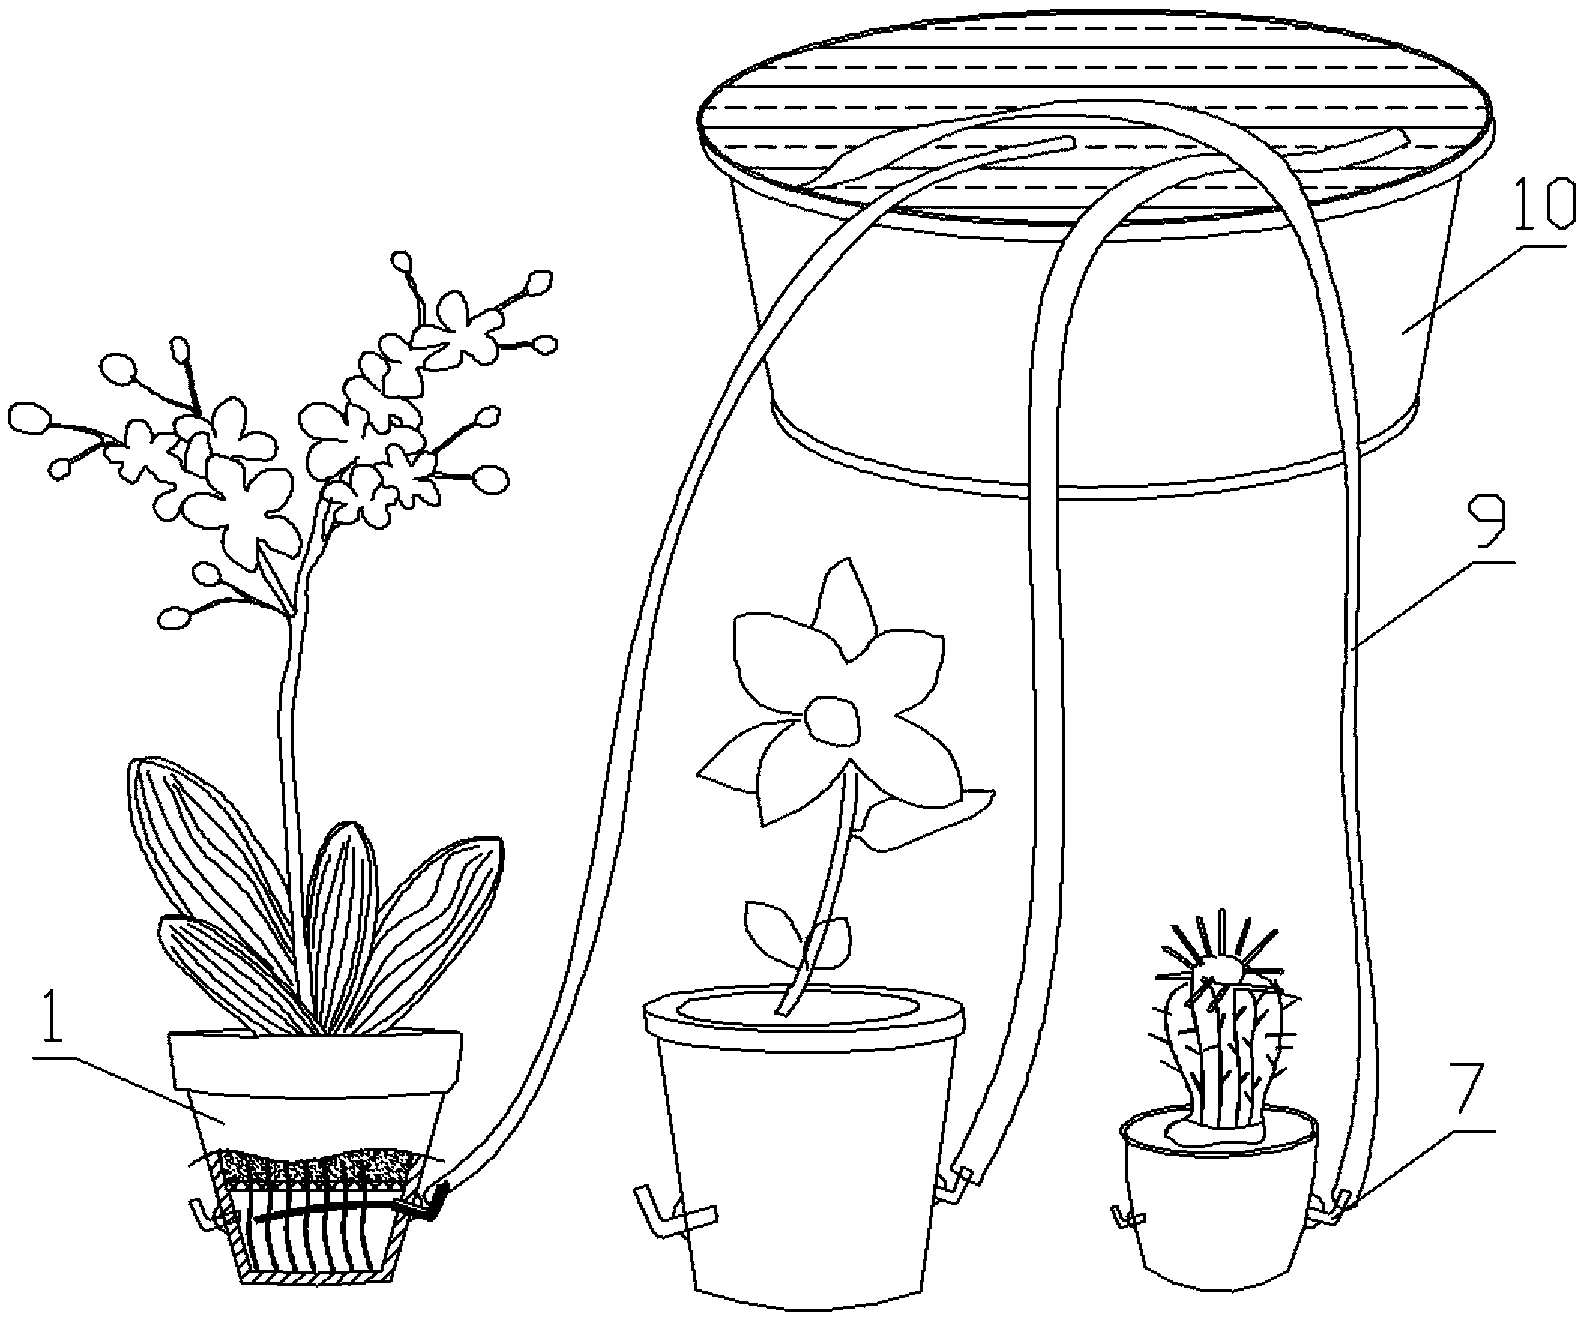 Flowerpot free of being watered every day